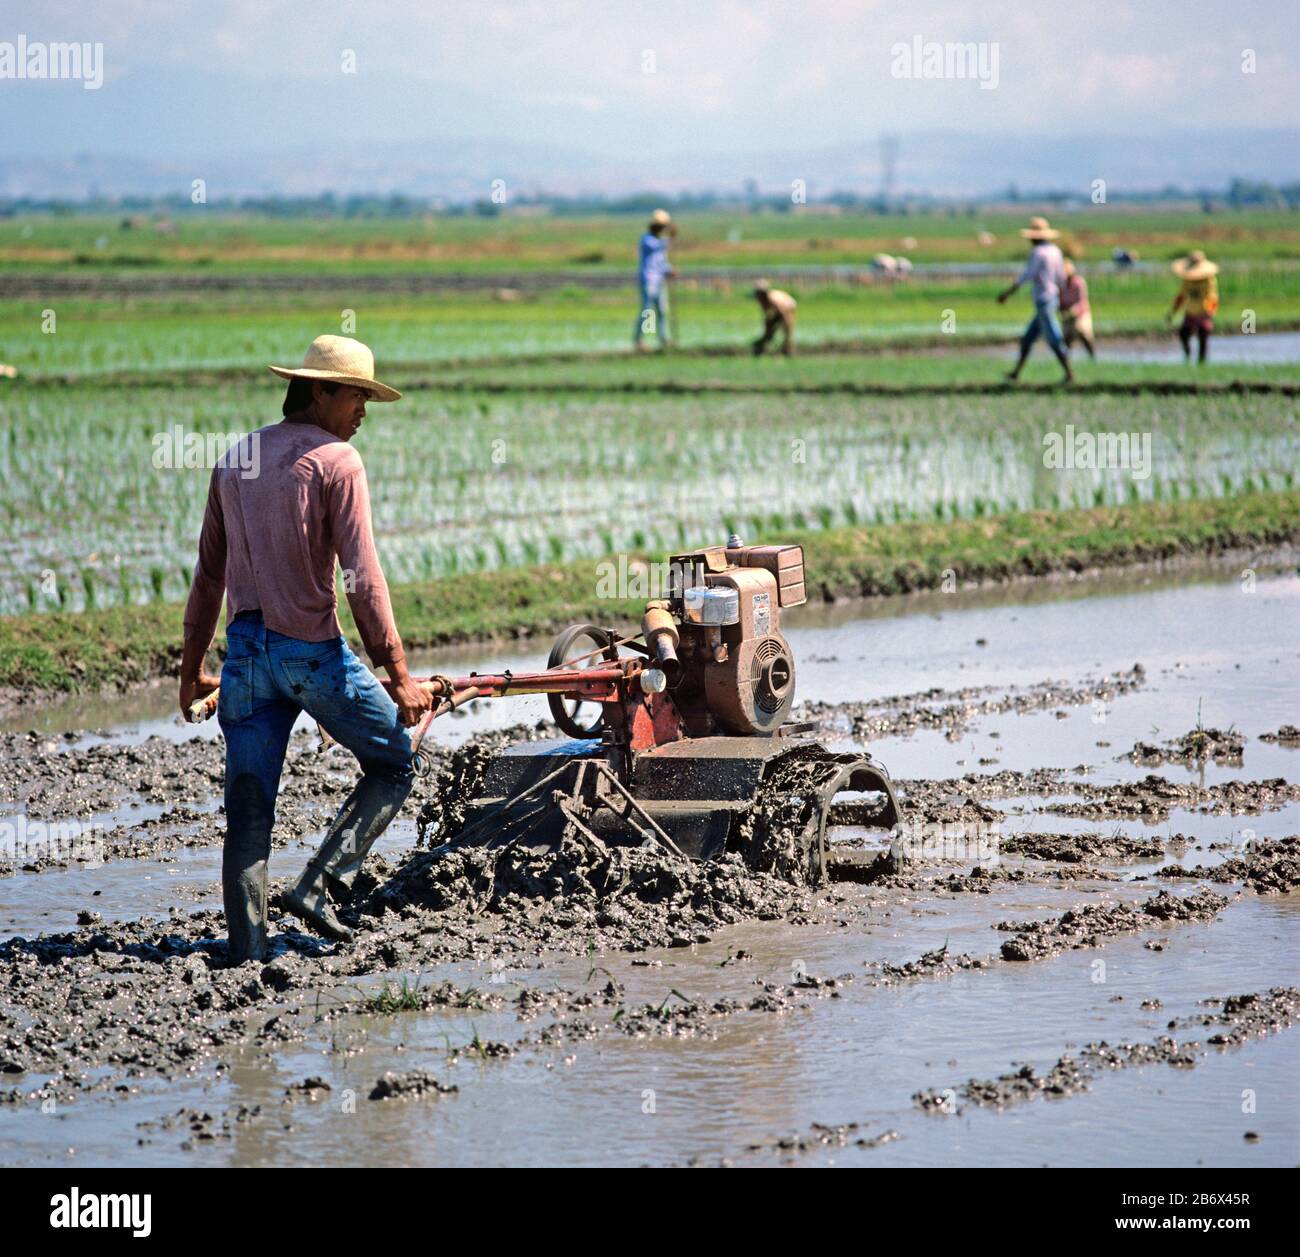 Man walking behind a mechanical, powered, rotovator turning soil in a flooded rice paddy before planting a seedling crop, Luzon, Philippines, February Stock Photo